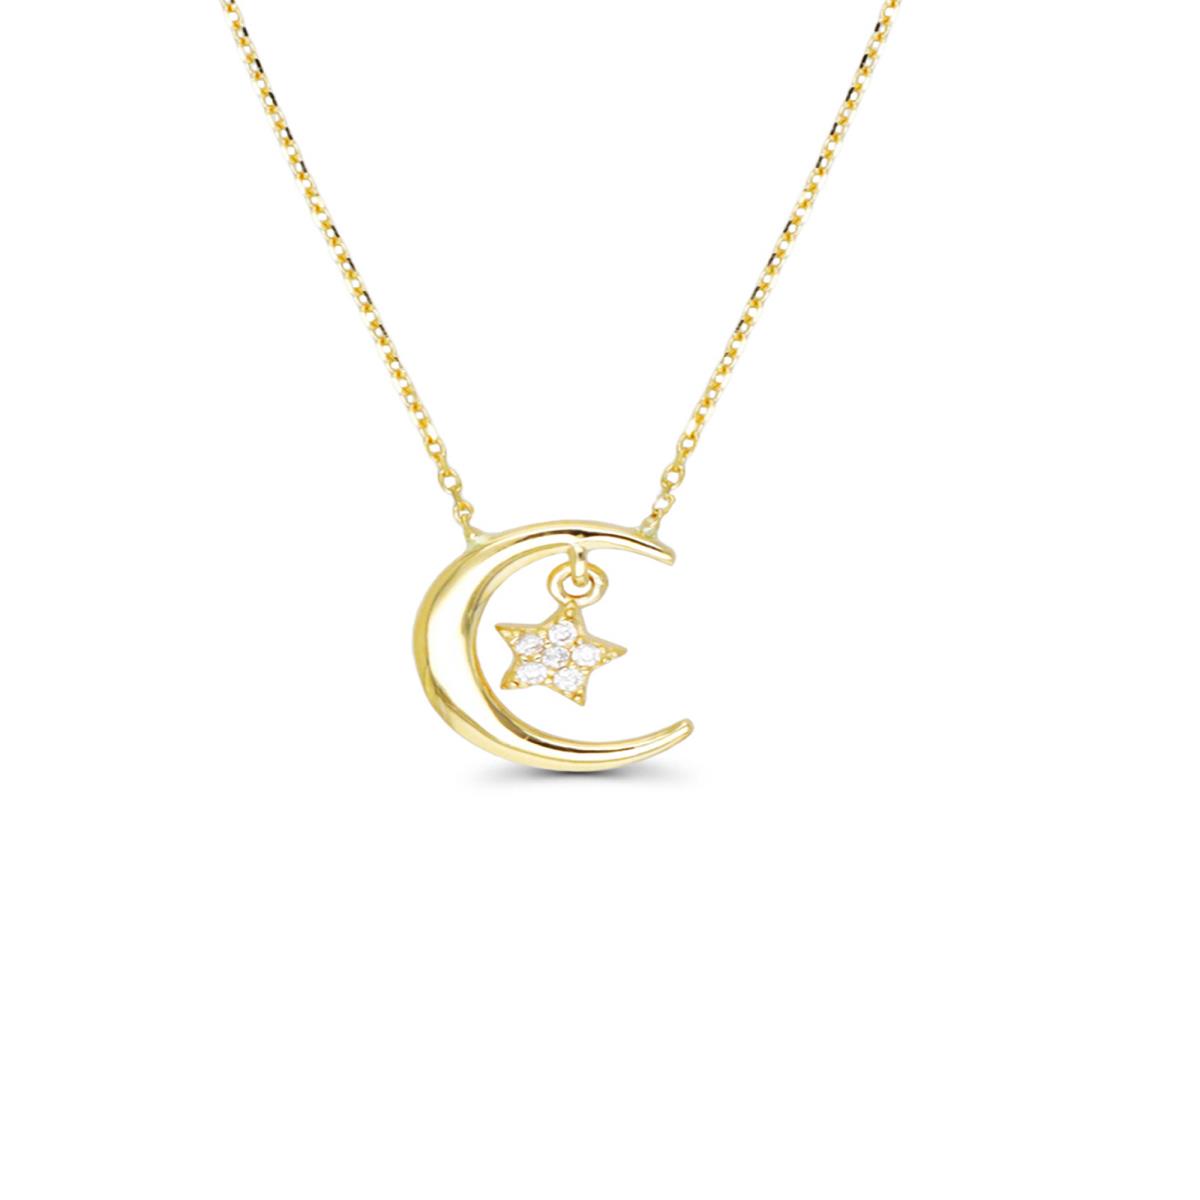 10K Yellow Gold Crescent Moon & Dangling Star 16"+2" Necklace